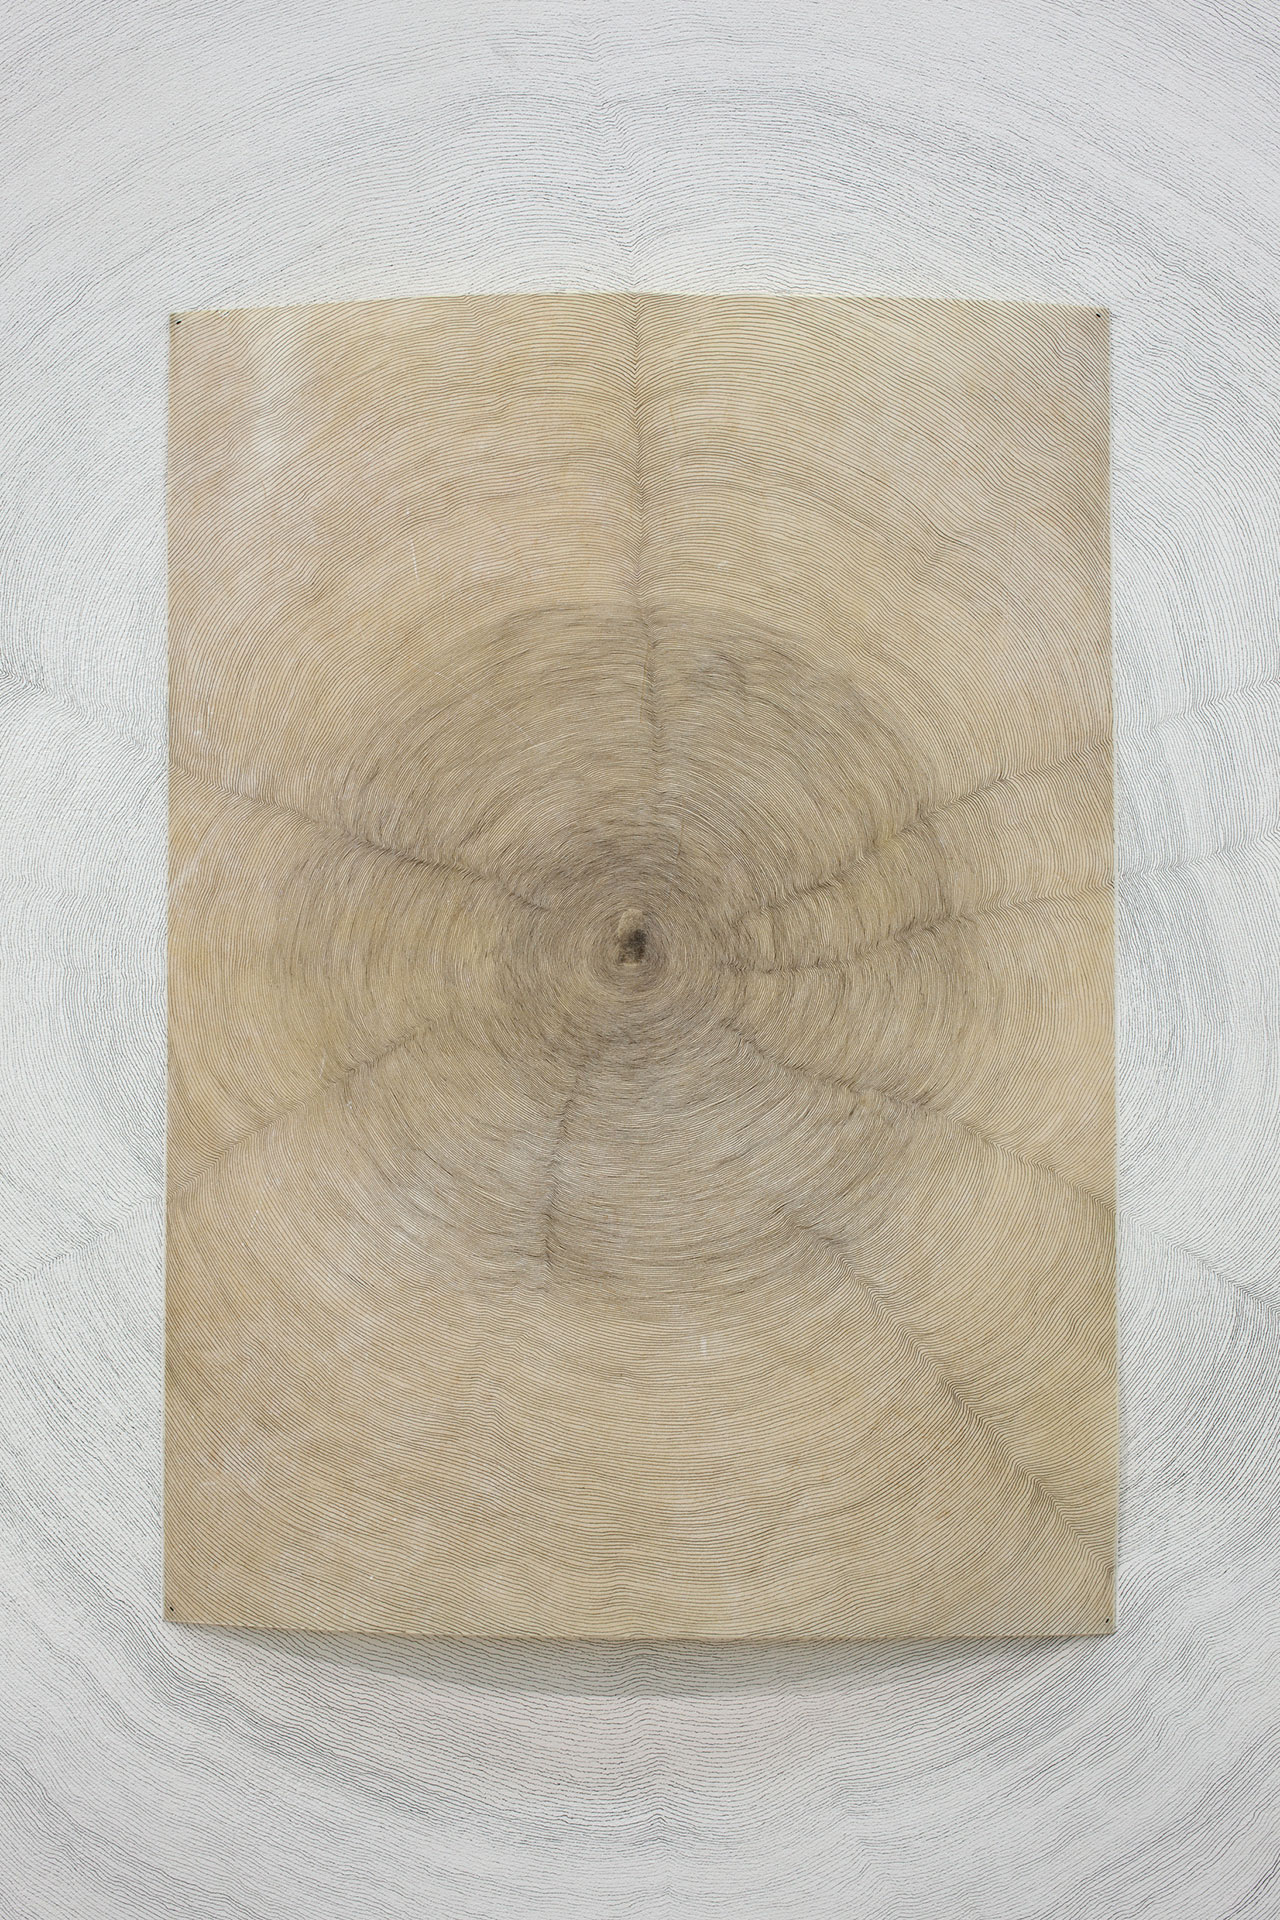 Giuseppe Penone, Propagazione, 2011. Pencil on vellum and ink on canvas, 300 x 400 cm, photo © Cathy Carver. Courtesy the artist and Marian Goodman Gallery, New York, Paris &amp; London.